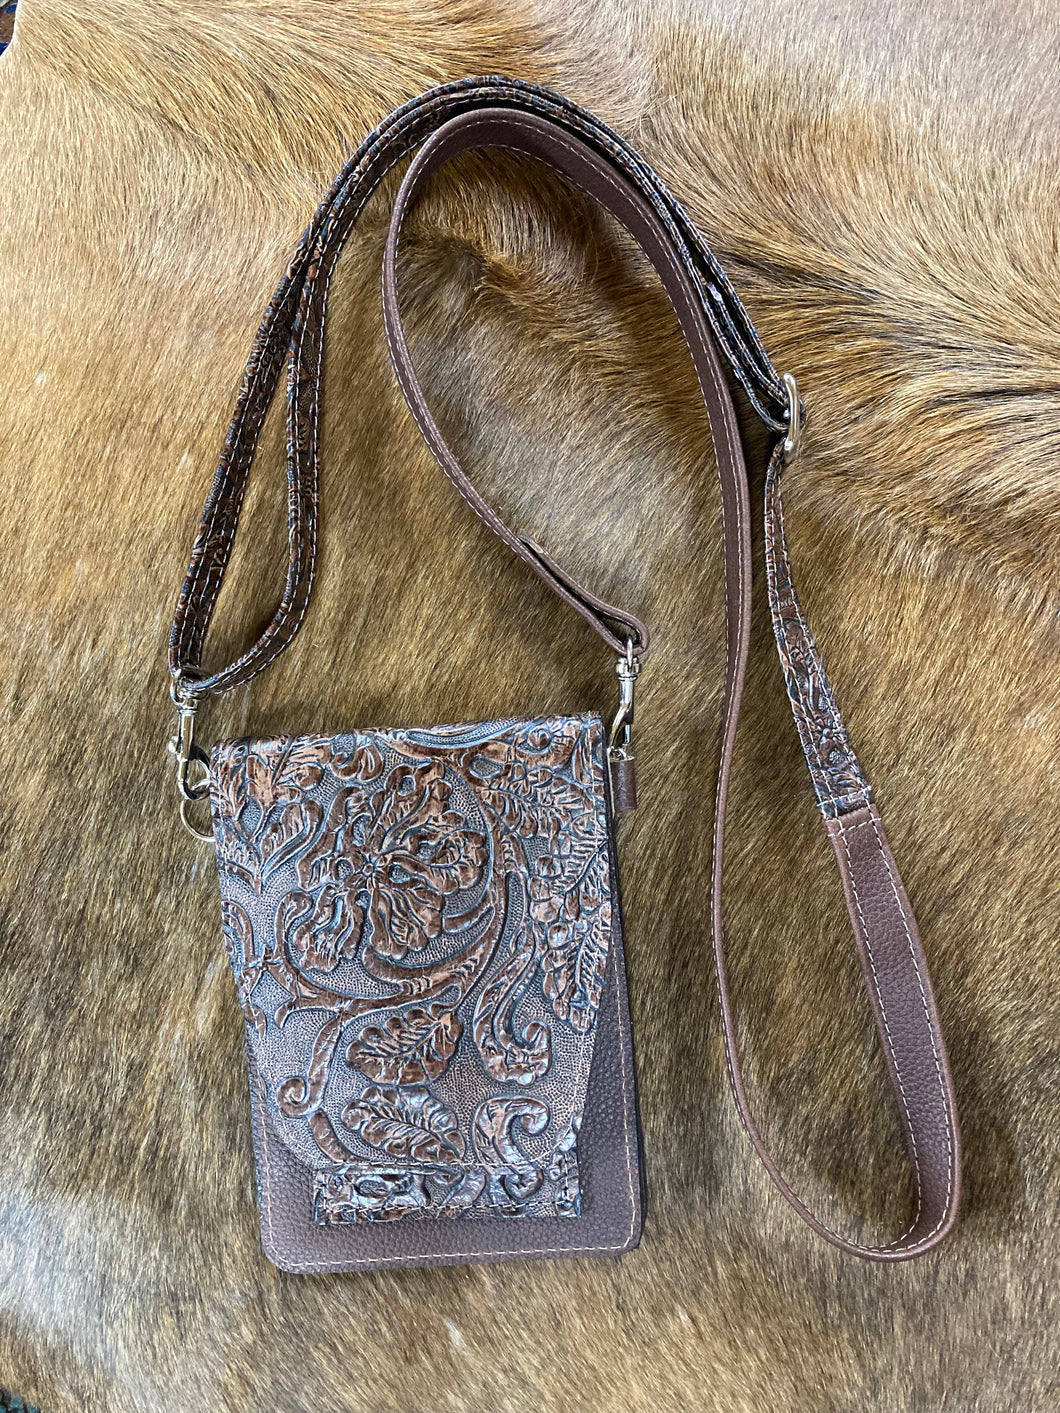 Cell Phone Purse - Brown Floral Embossed Leather